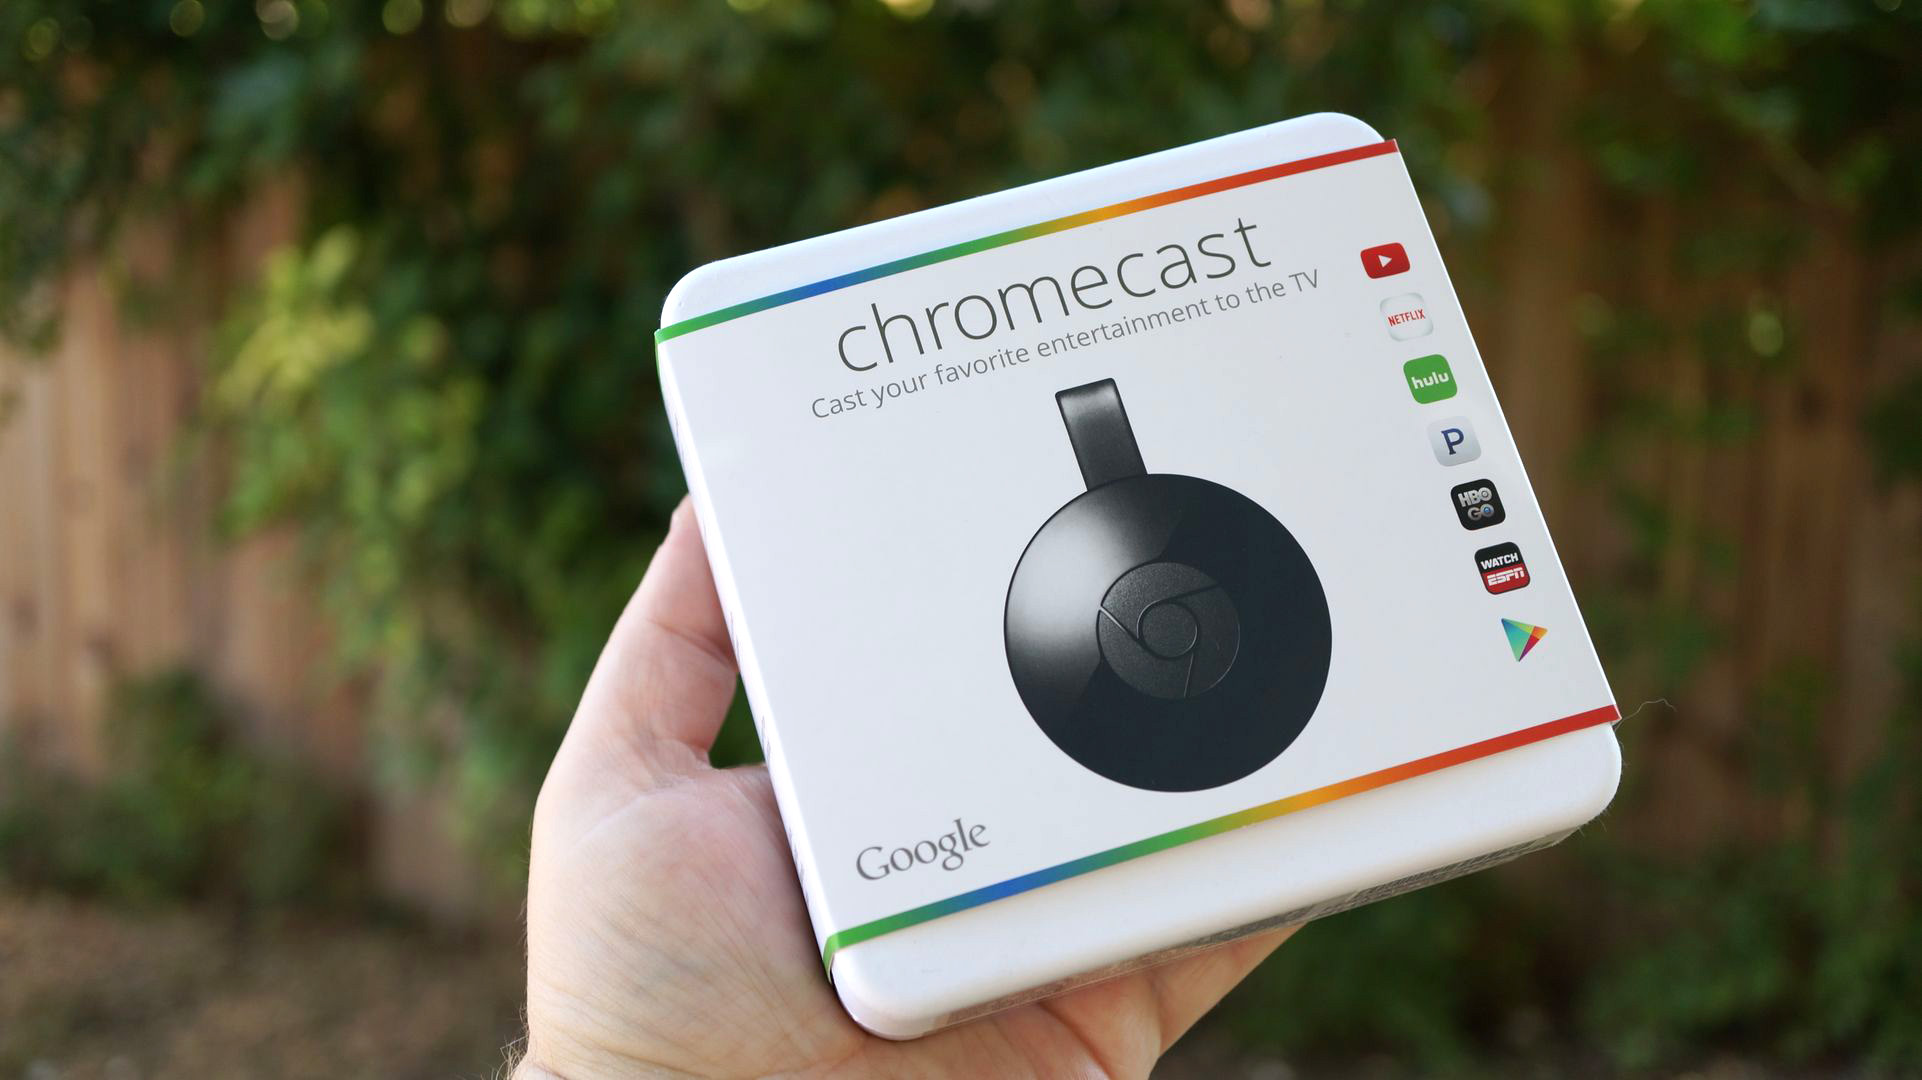 Lee missil mål How To Set Up Chromecast Using Android, iOS, And PC?